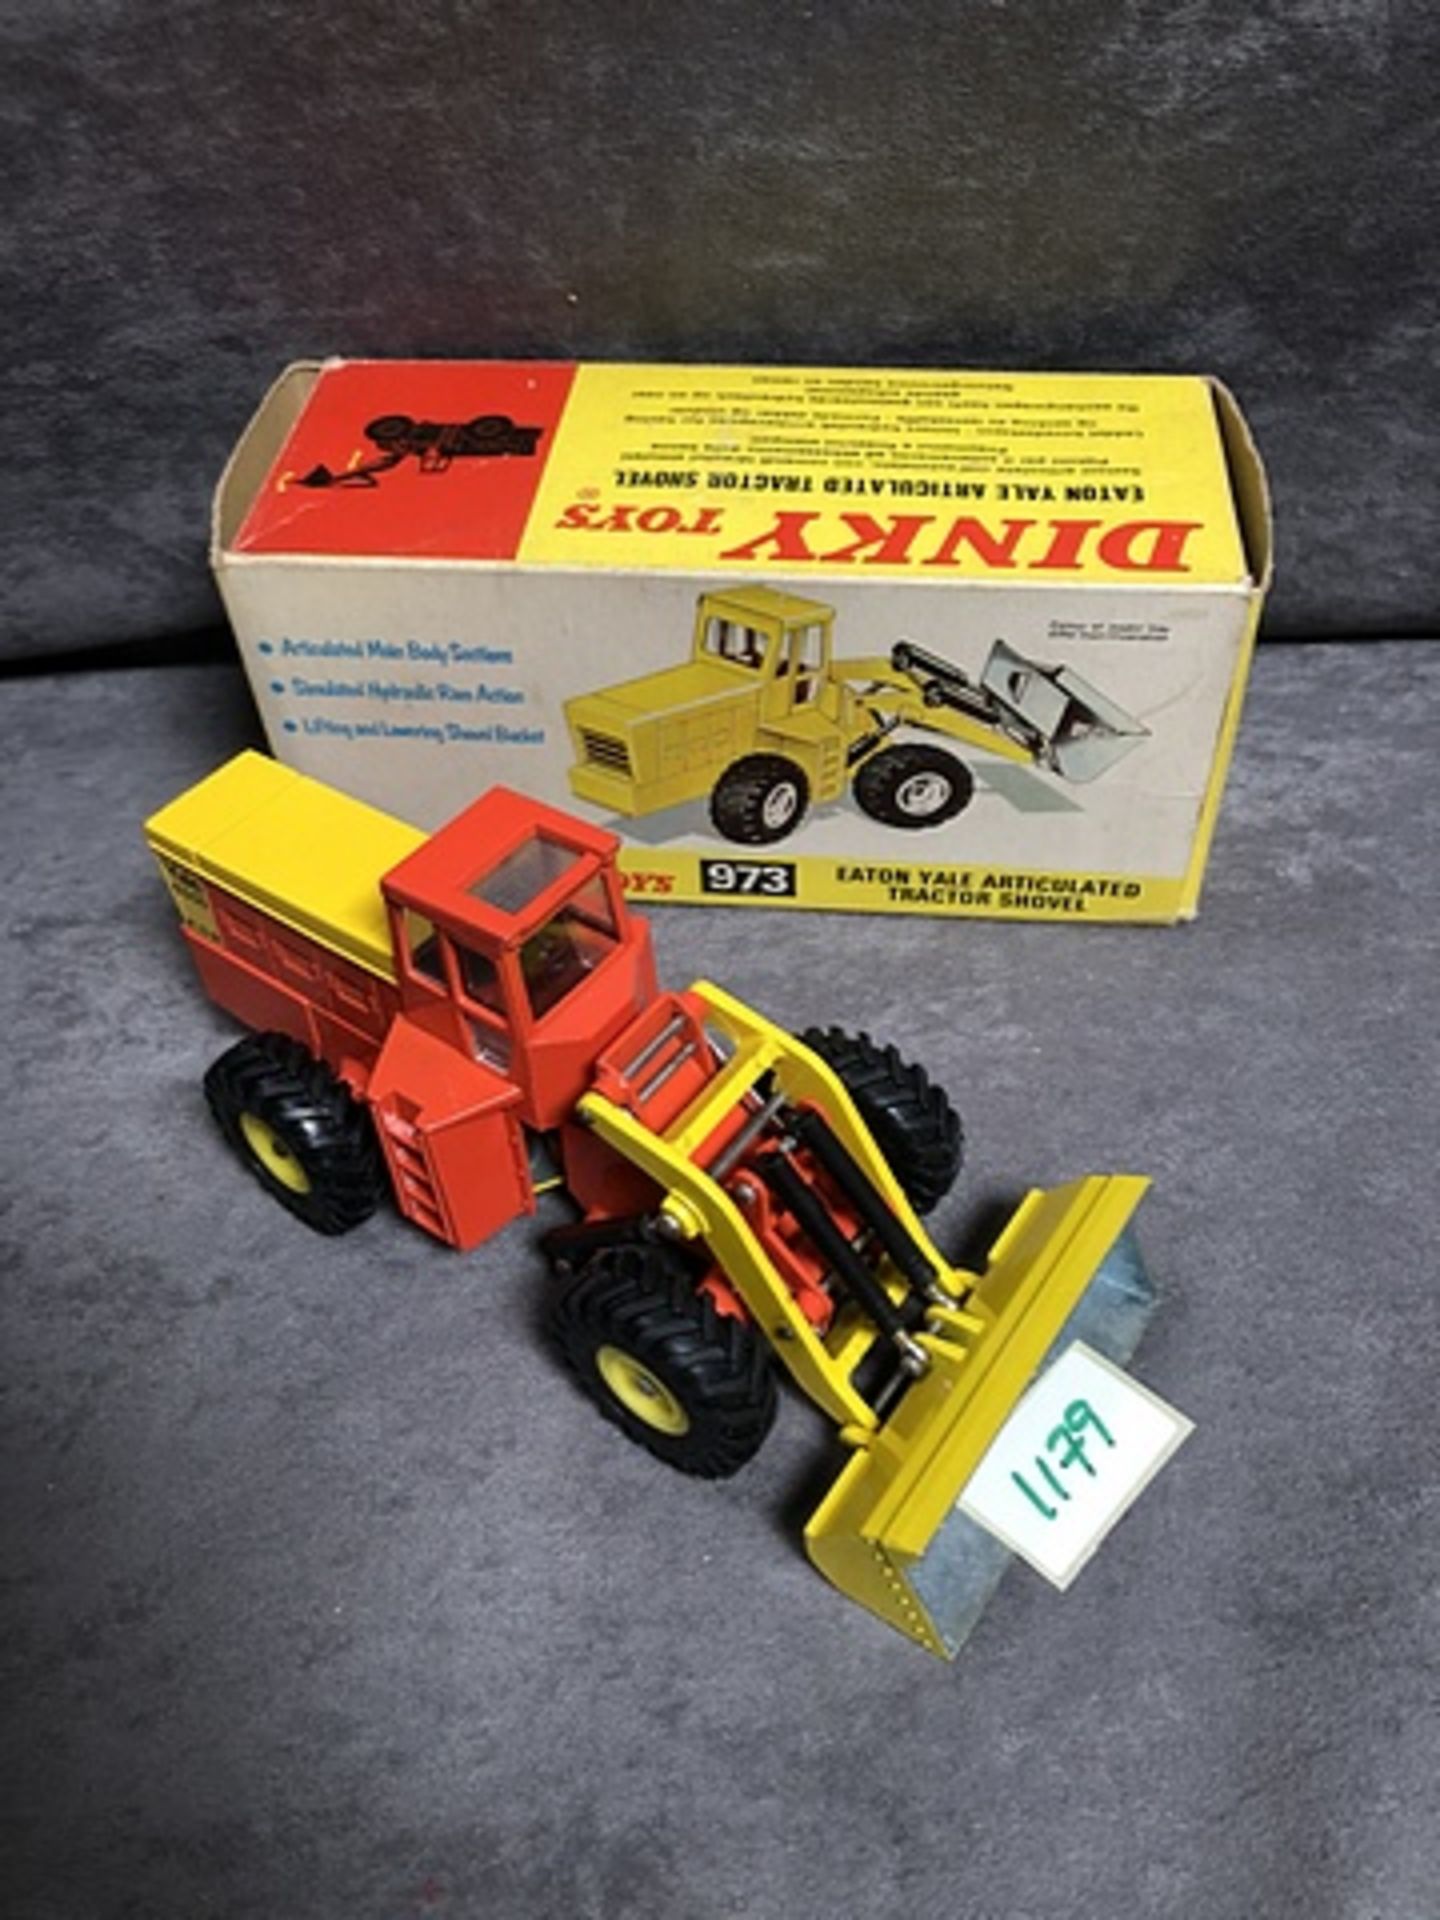 Dinky Toys Diecast #973 Eaton Yale Articulated Tractor Shovel Complete With Box (Damage To Box)